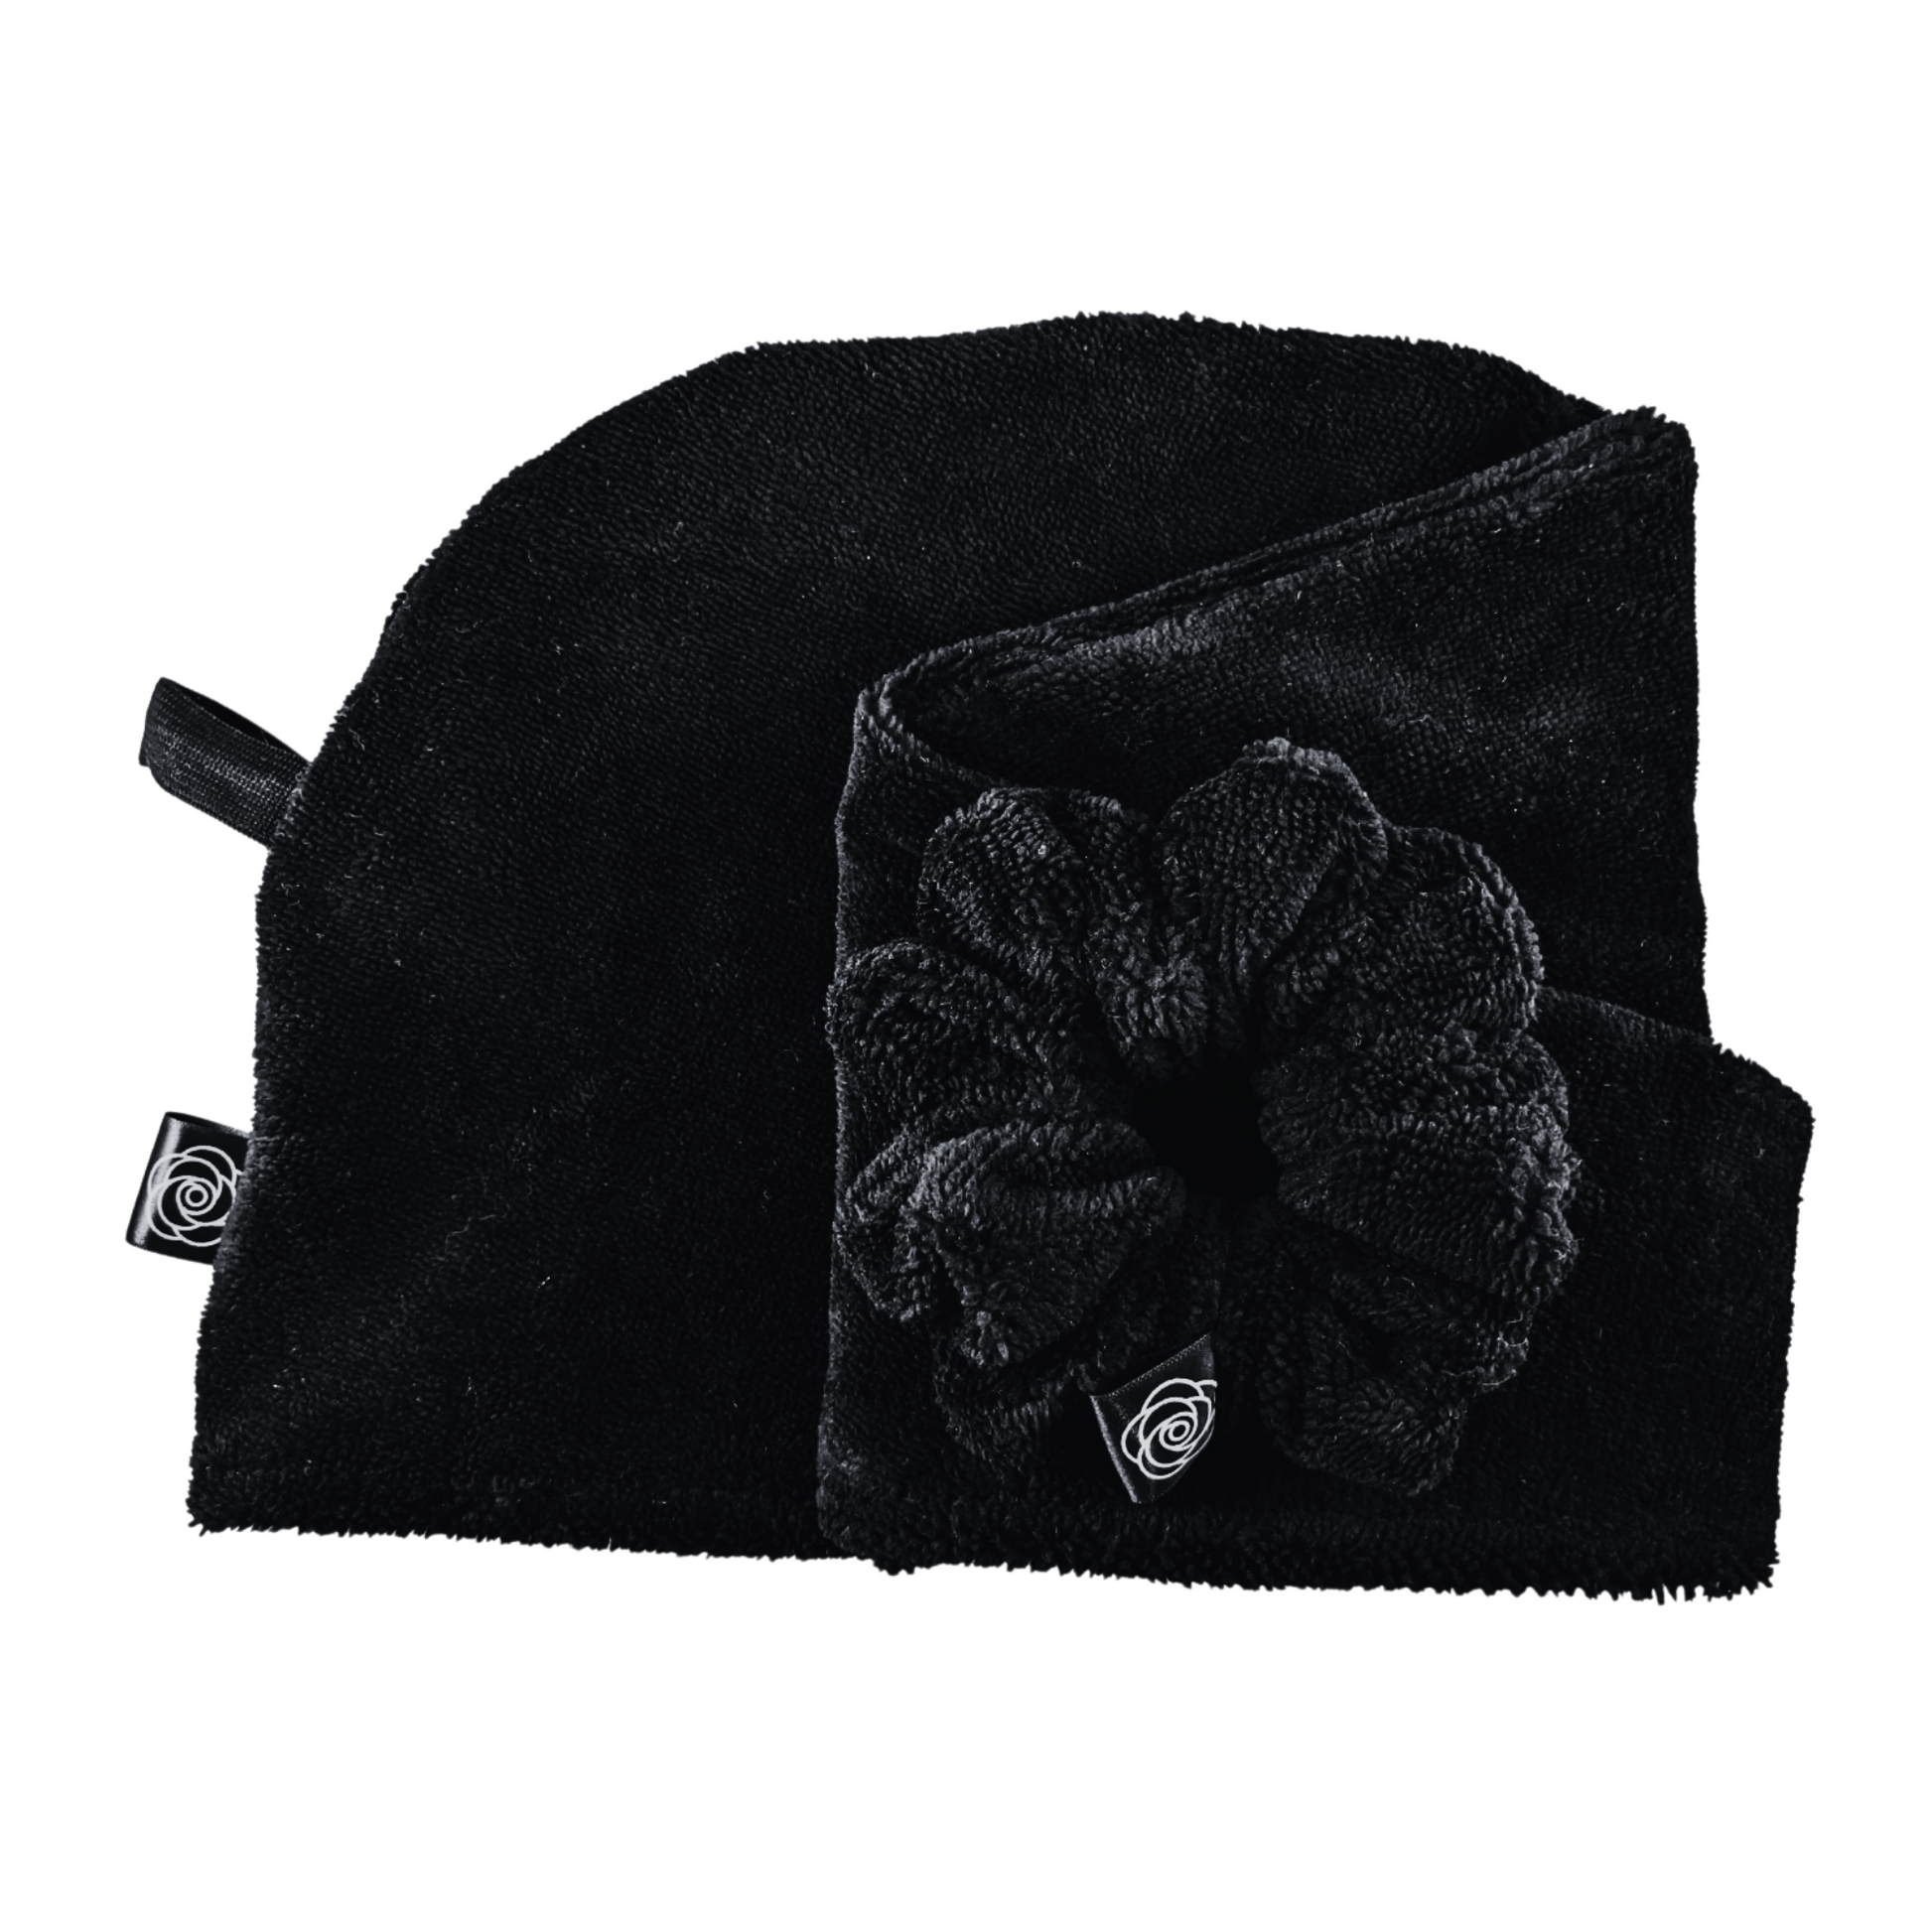 Black hair drying towel and towel scrunchie for women, the perfect gift